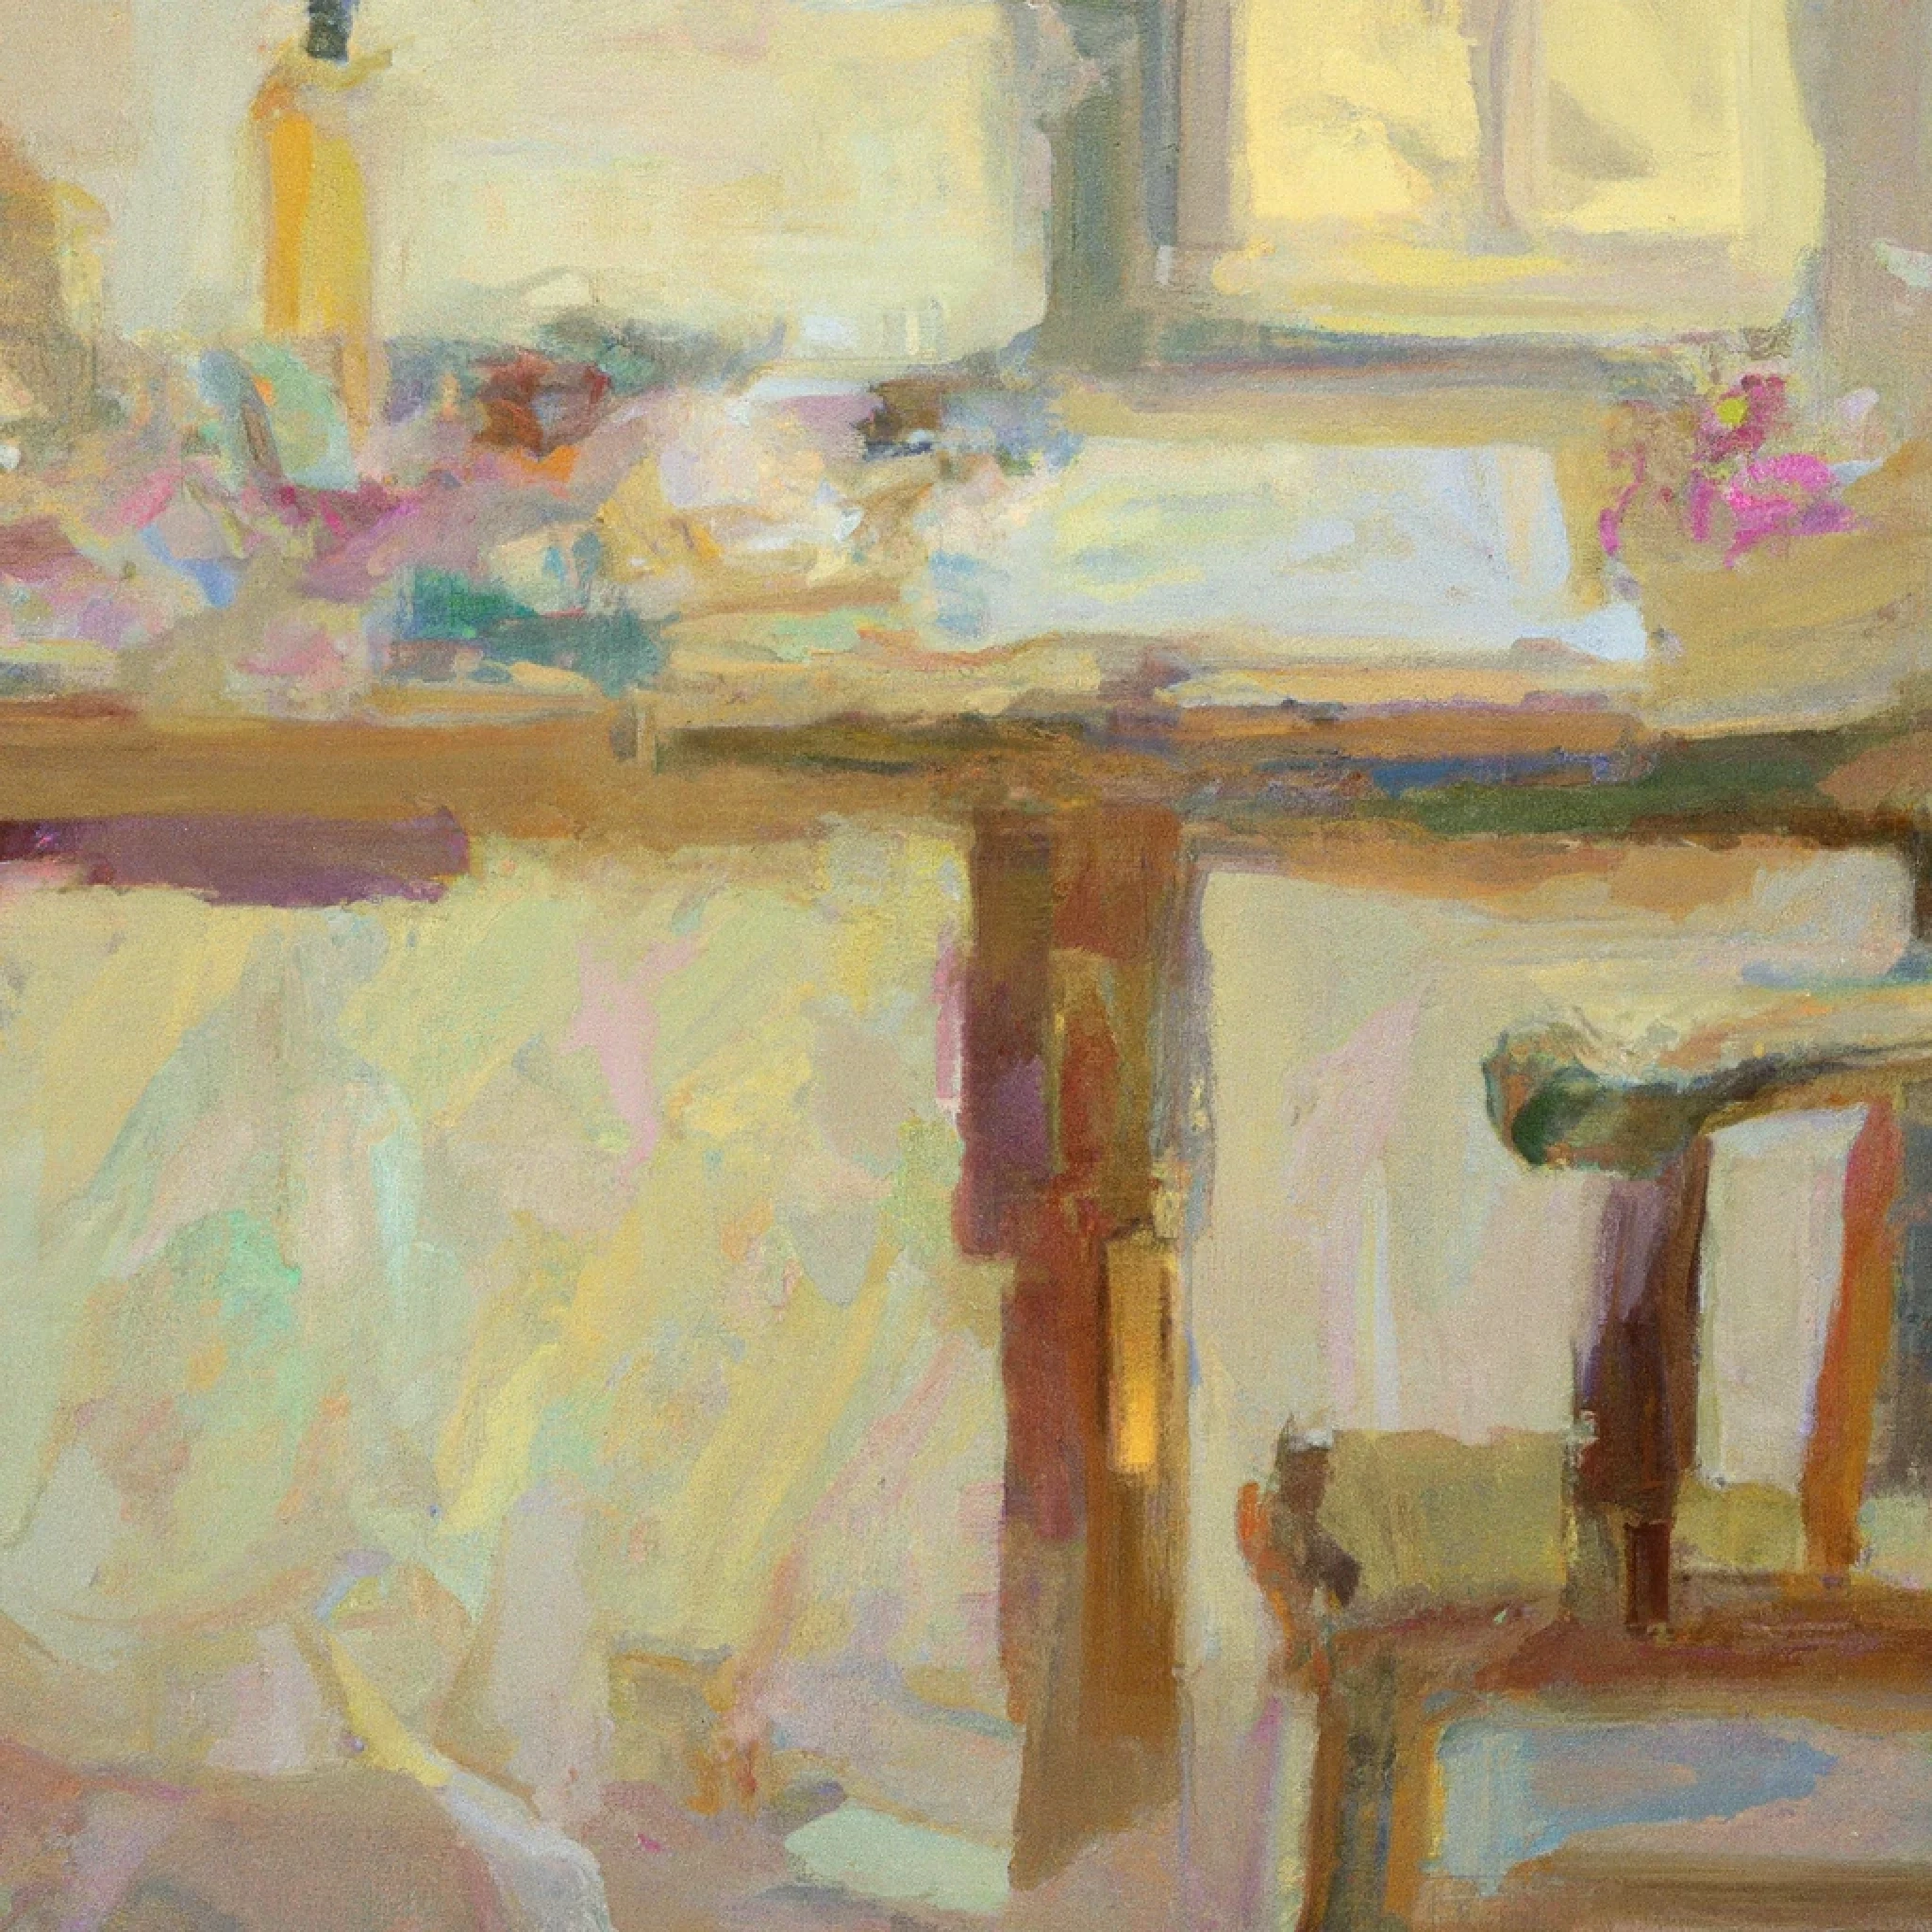 An abstract expressionist painting of a desk and chair near a window in a warm color palette.